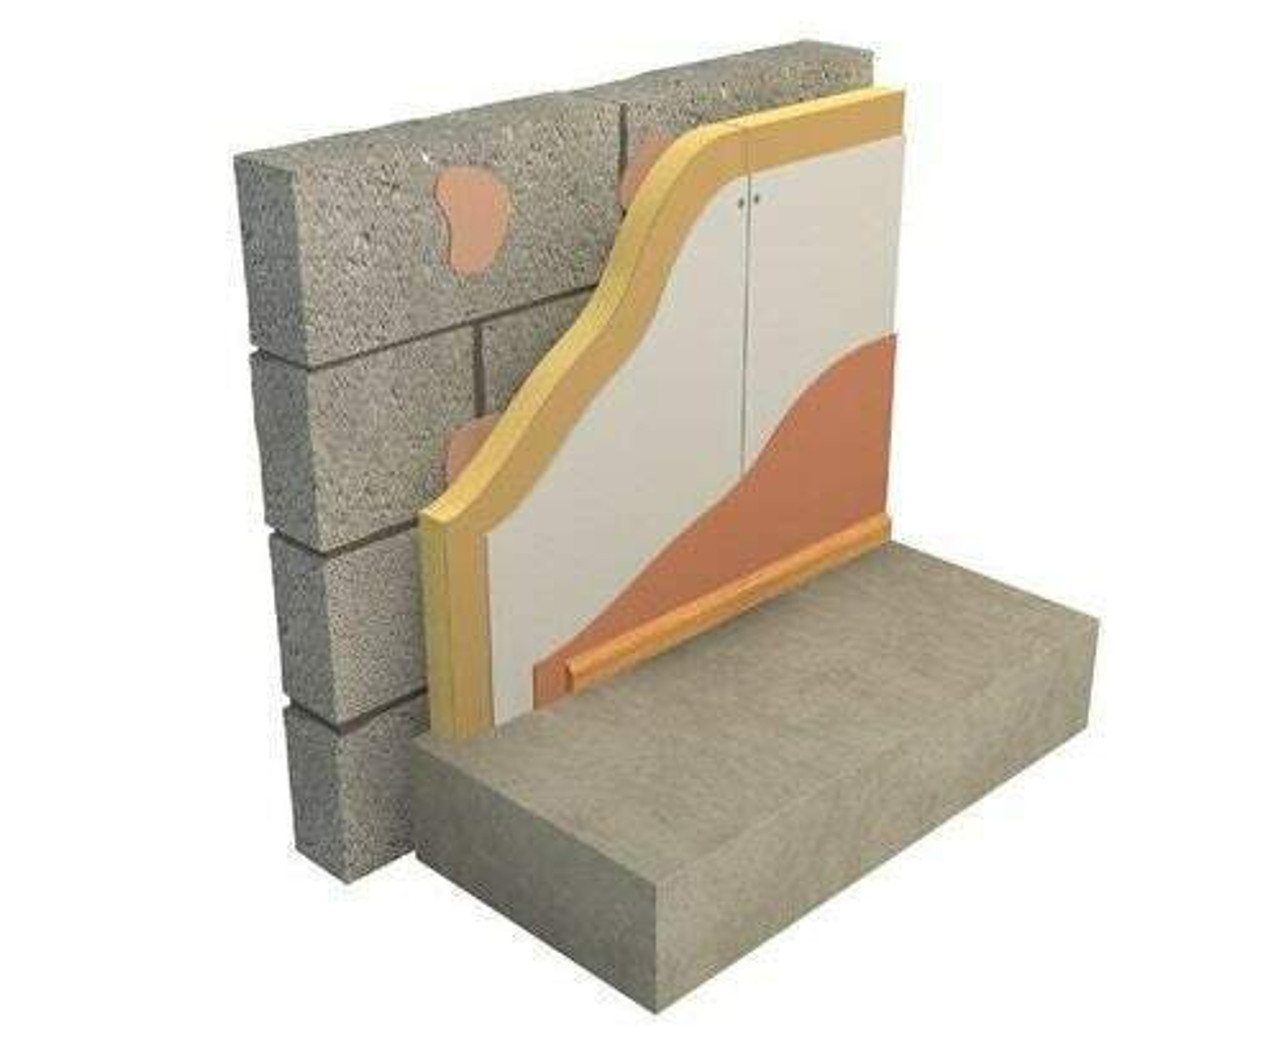 72.5mm- EcoTherm Eco-Liner Rigid PIR Dry Lining Insulation Board - 2400mm x 1200mm x 72.5mm 100000021529-S ECO-50385